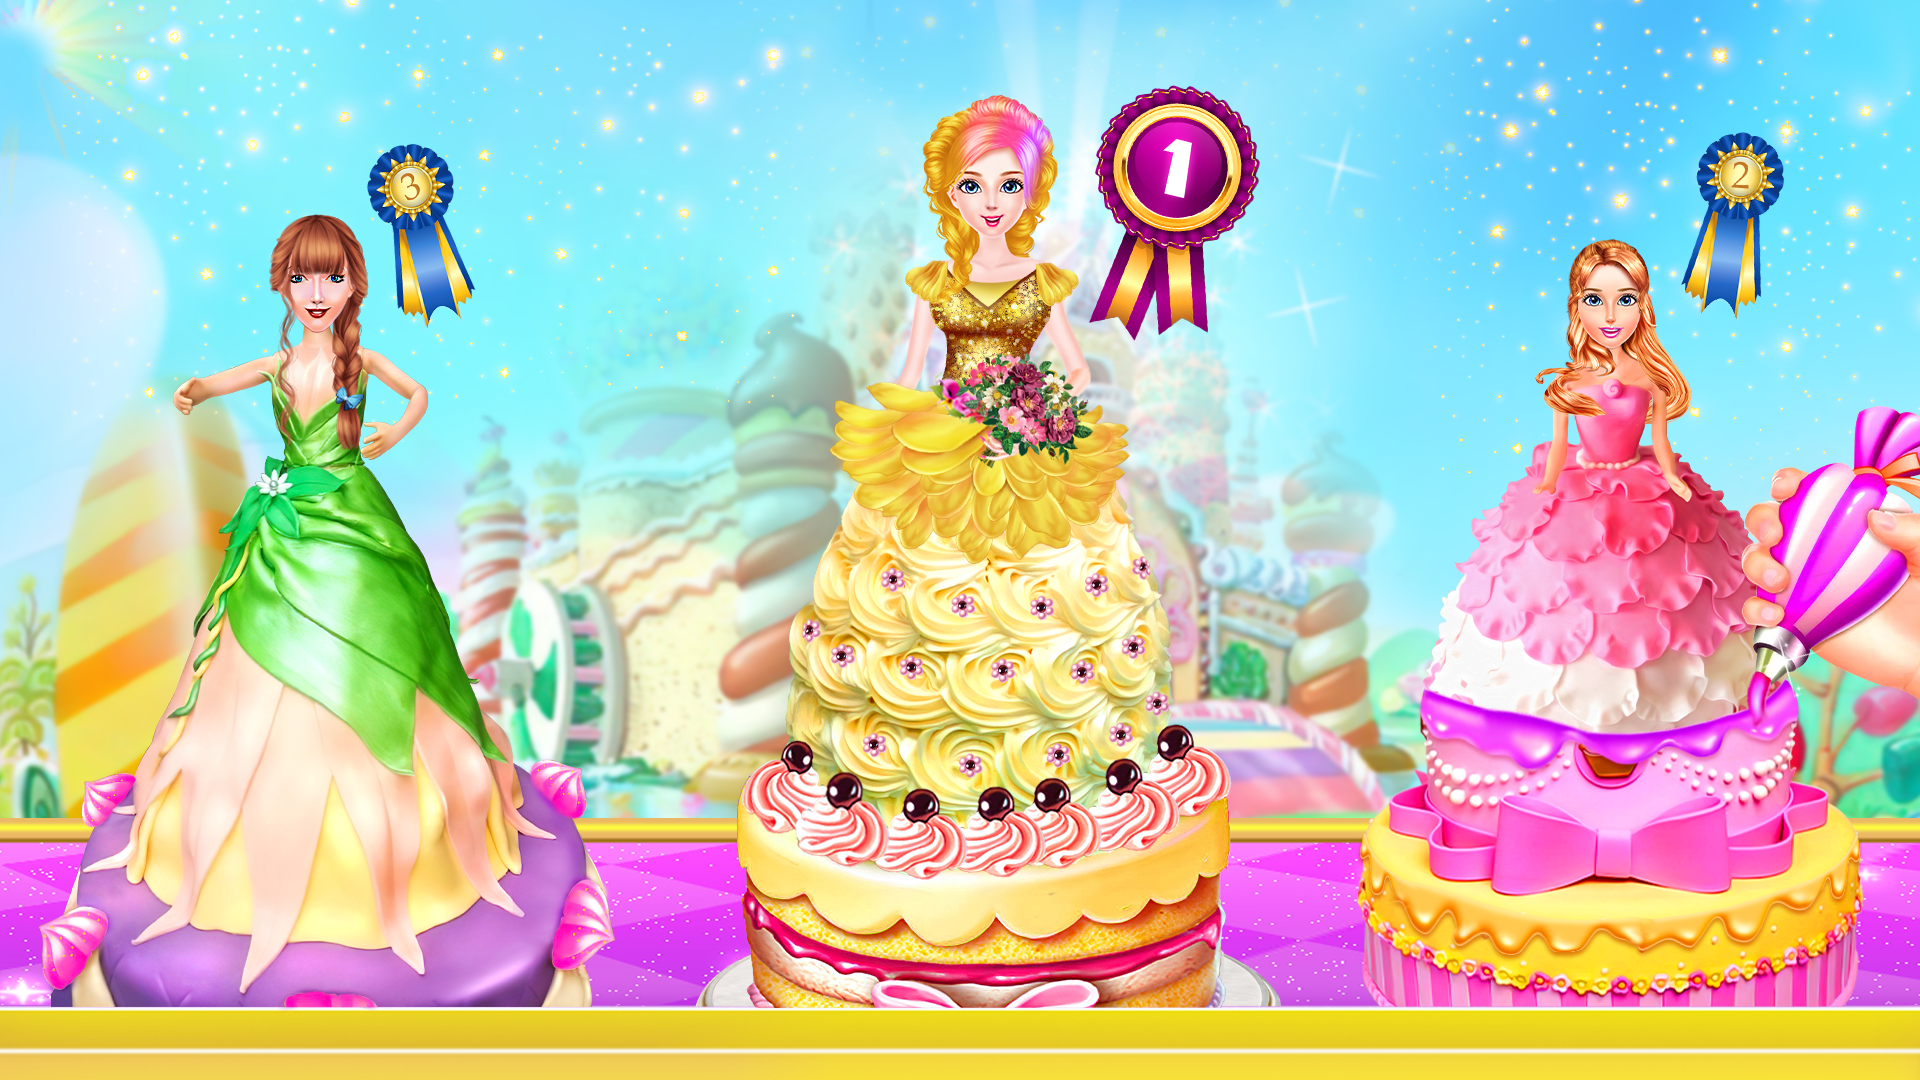 BARBIE COOKING GAMES🎂FREE ONLINE BARBIE DOLL GAMES TO PLAY NOW 🎂BAKE A CAKE  GAME - YouTube